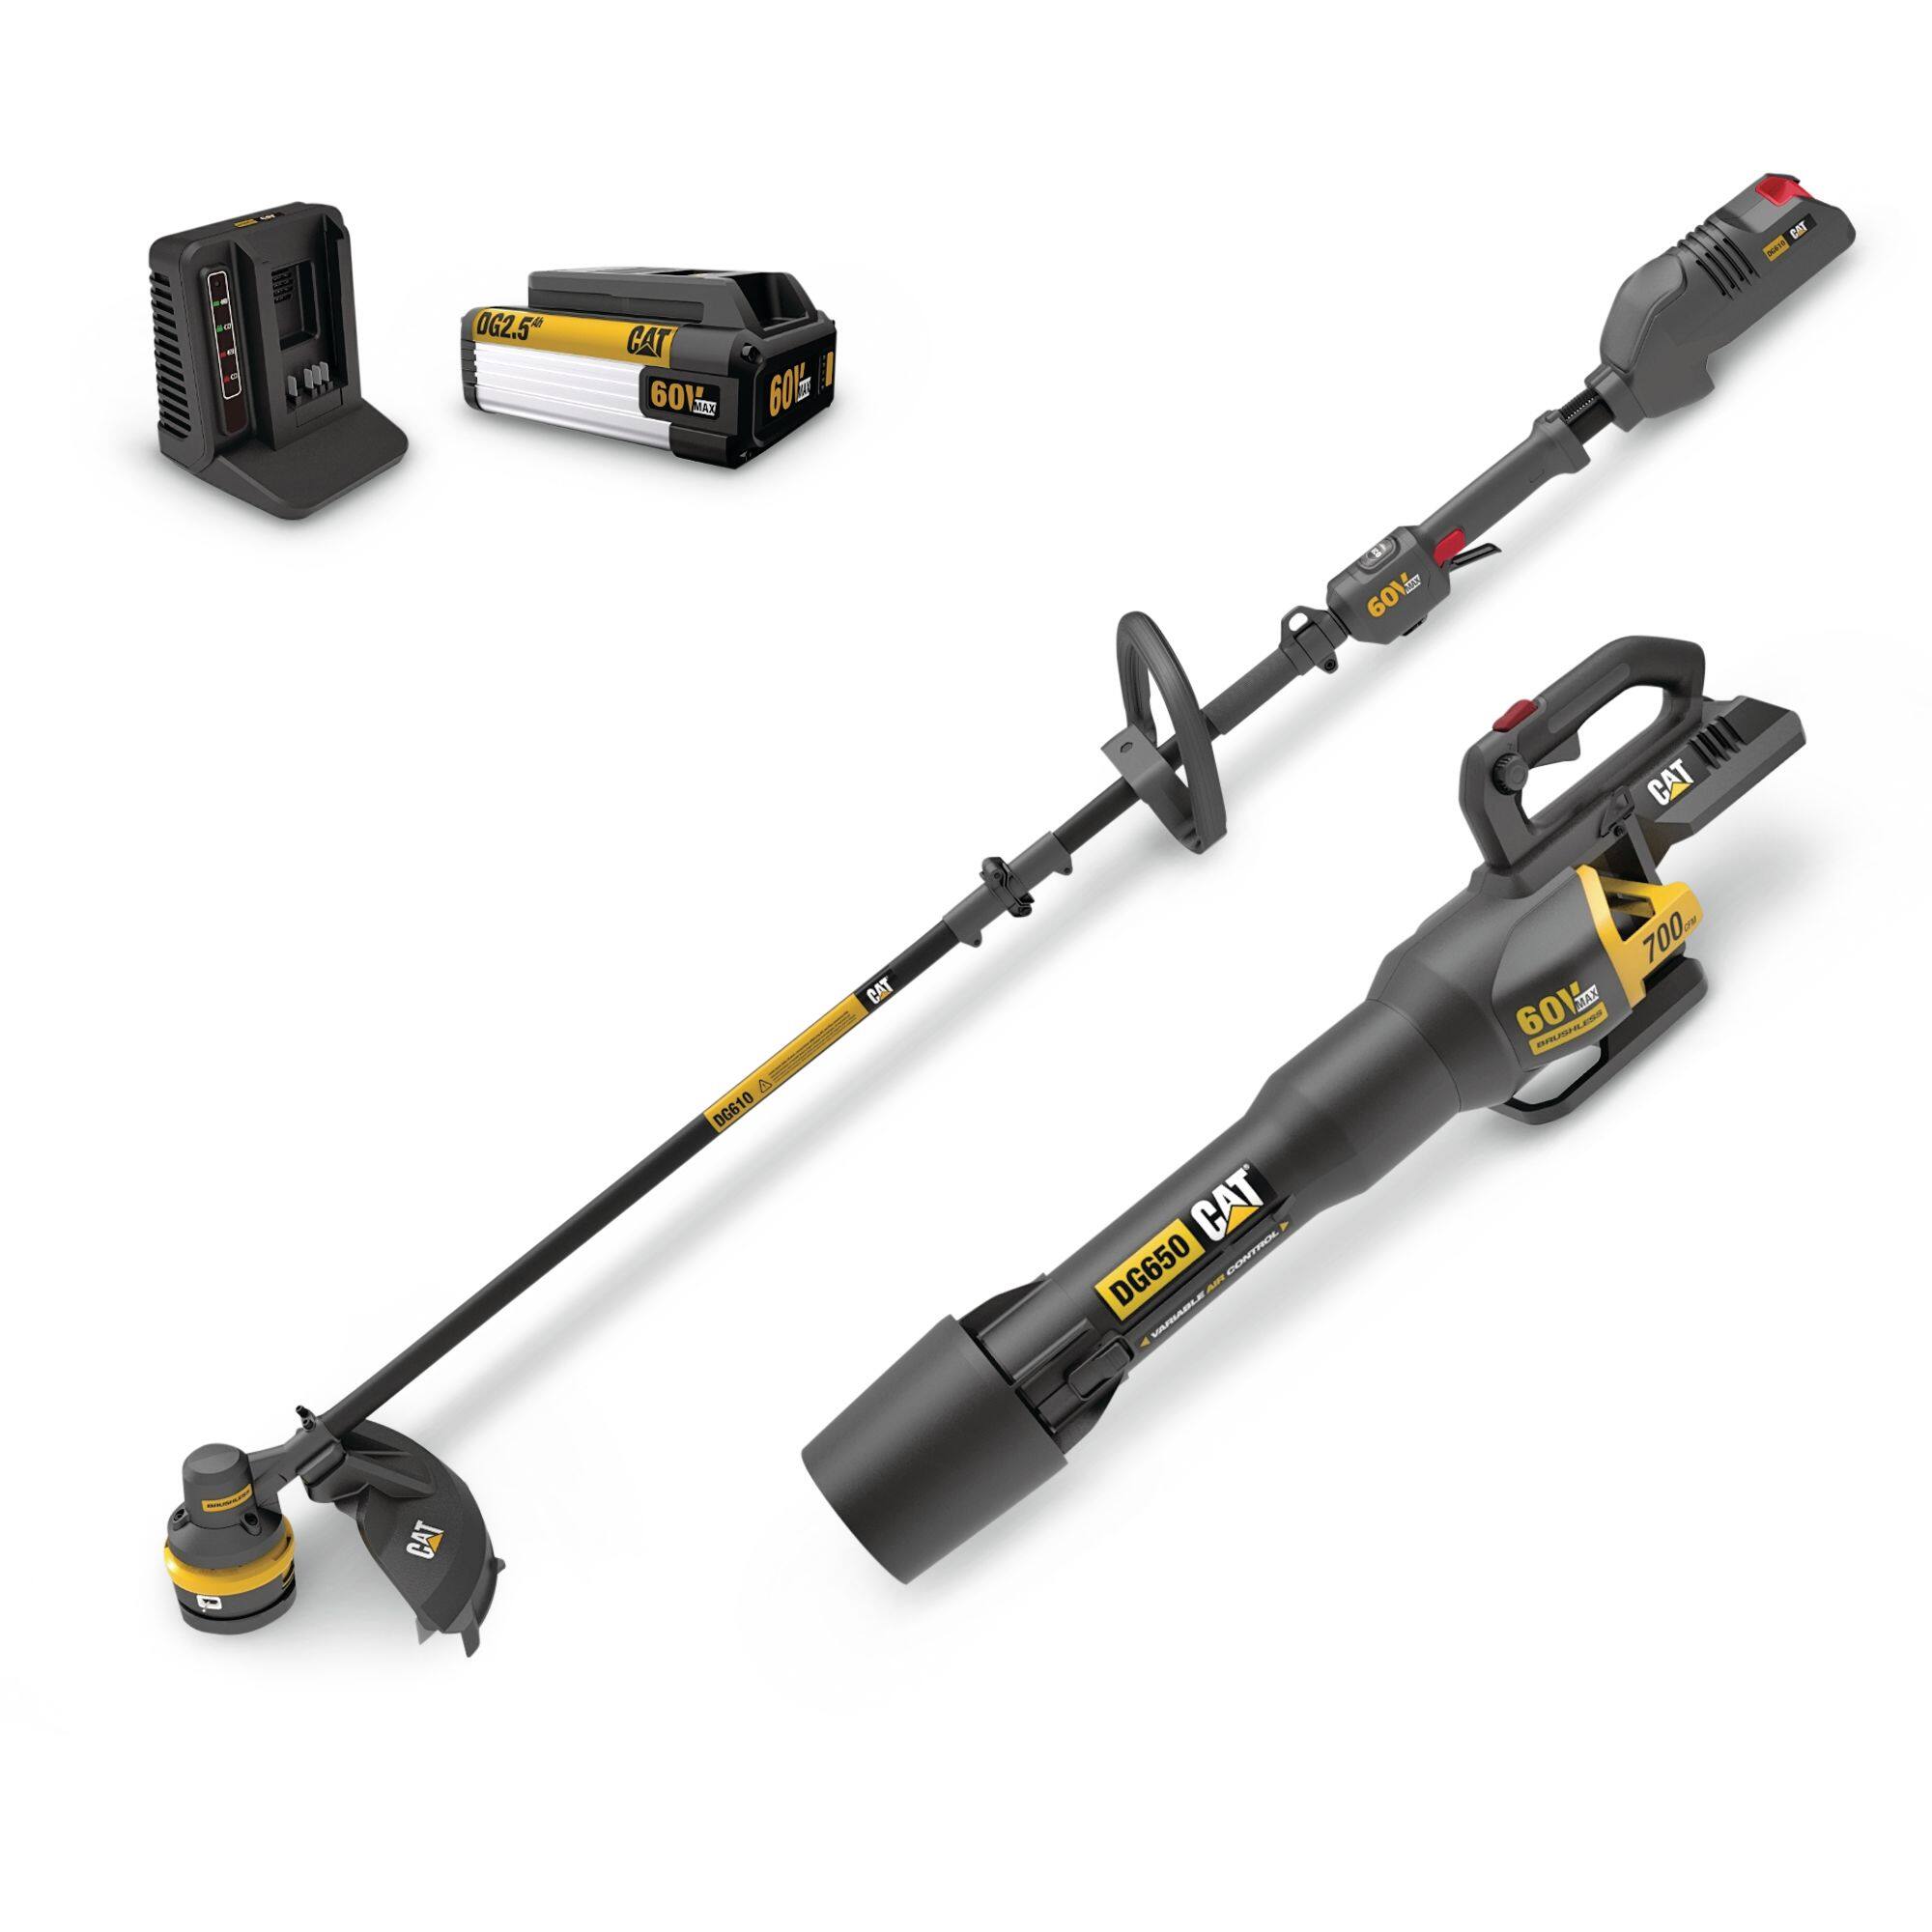 CAT 60V Cordless Trimmer/Blower Combo Kit with 2.5Ah Battery